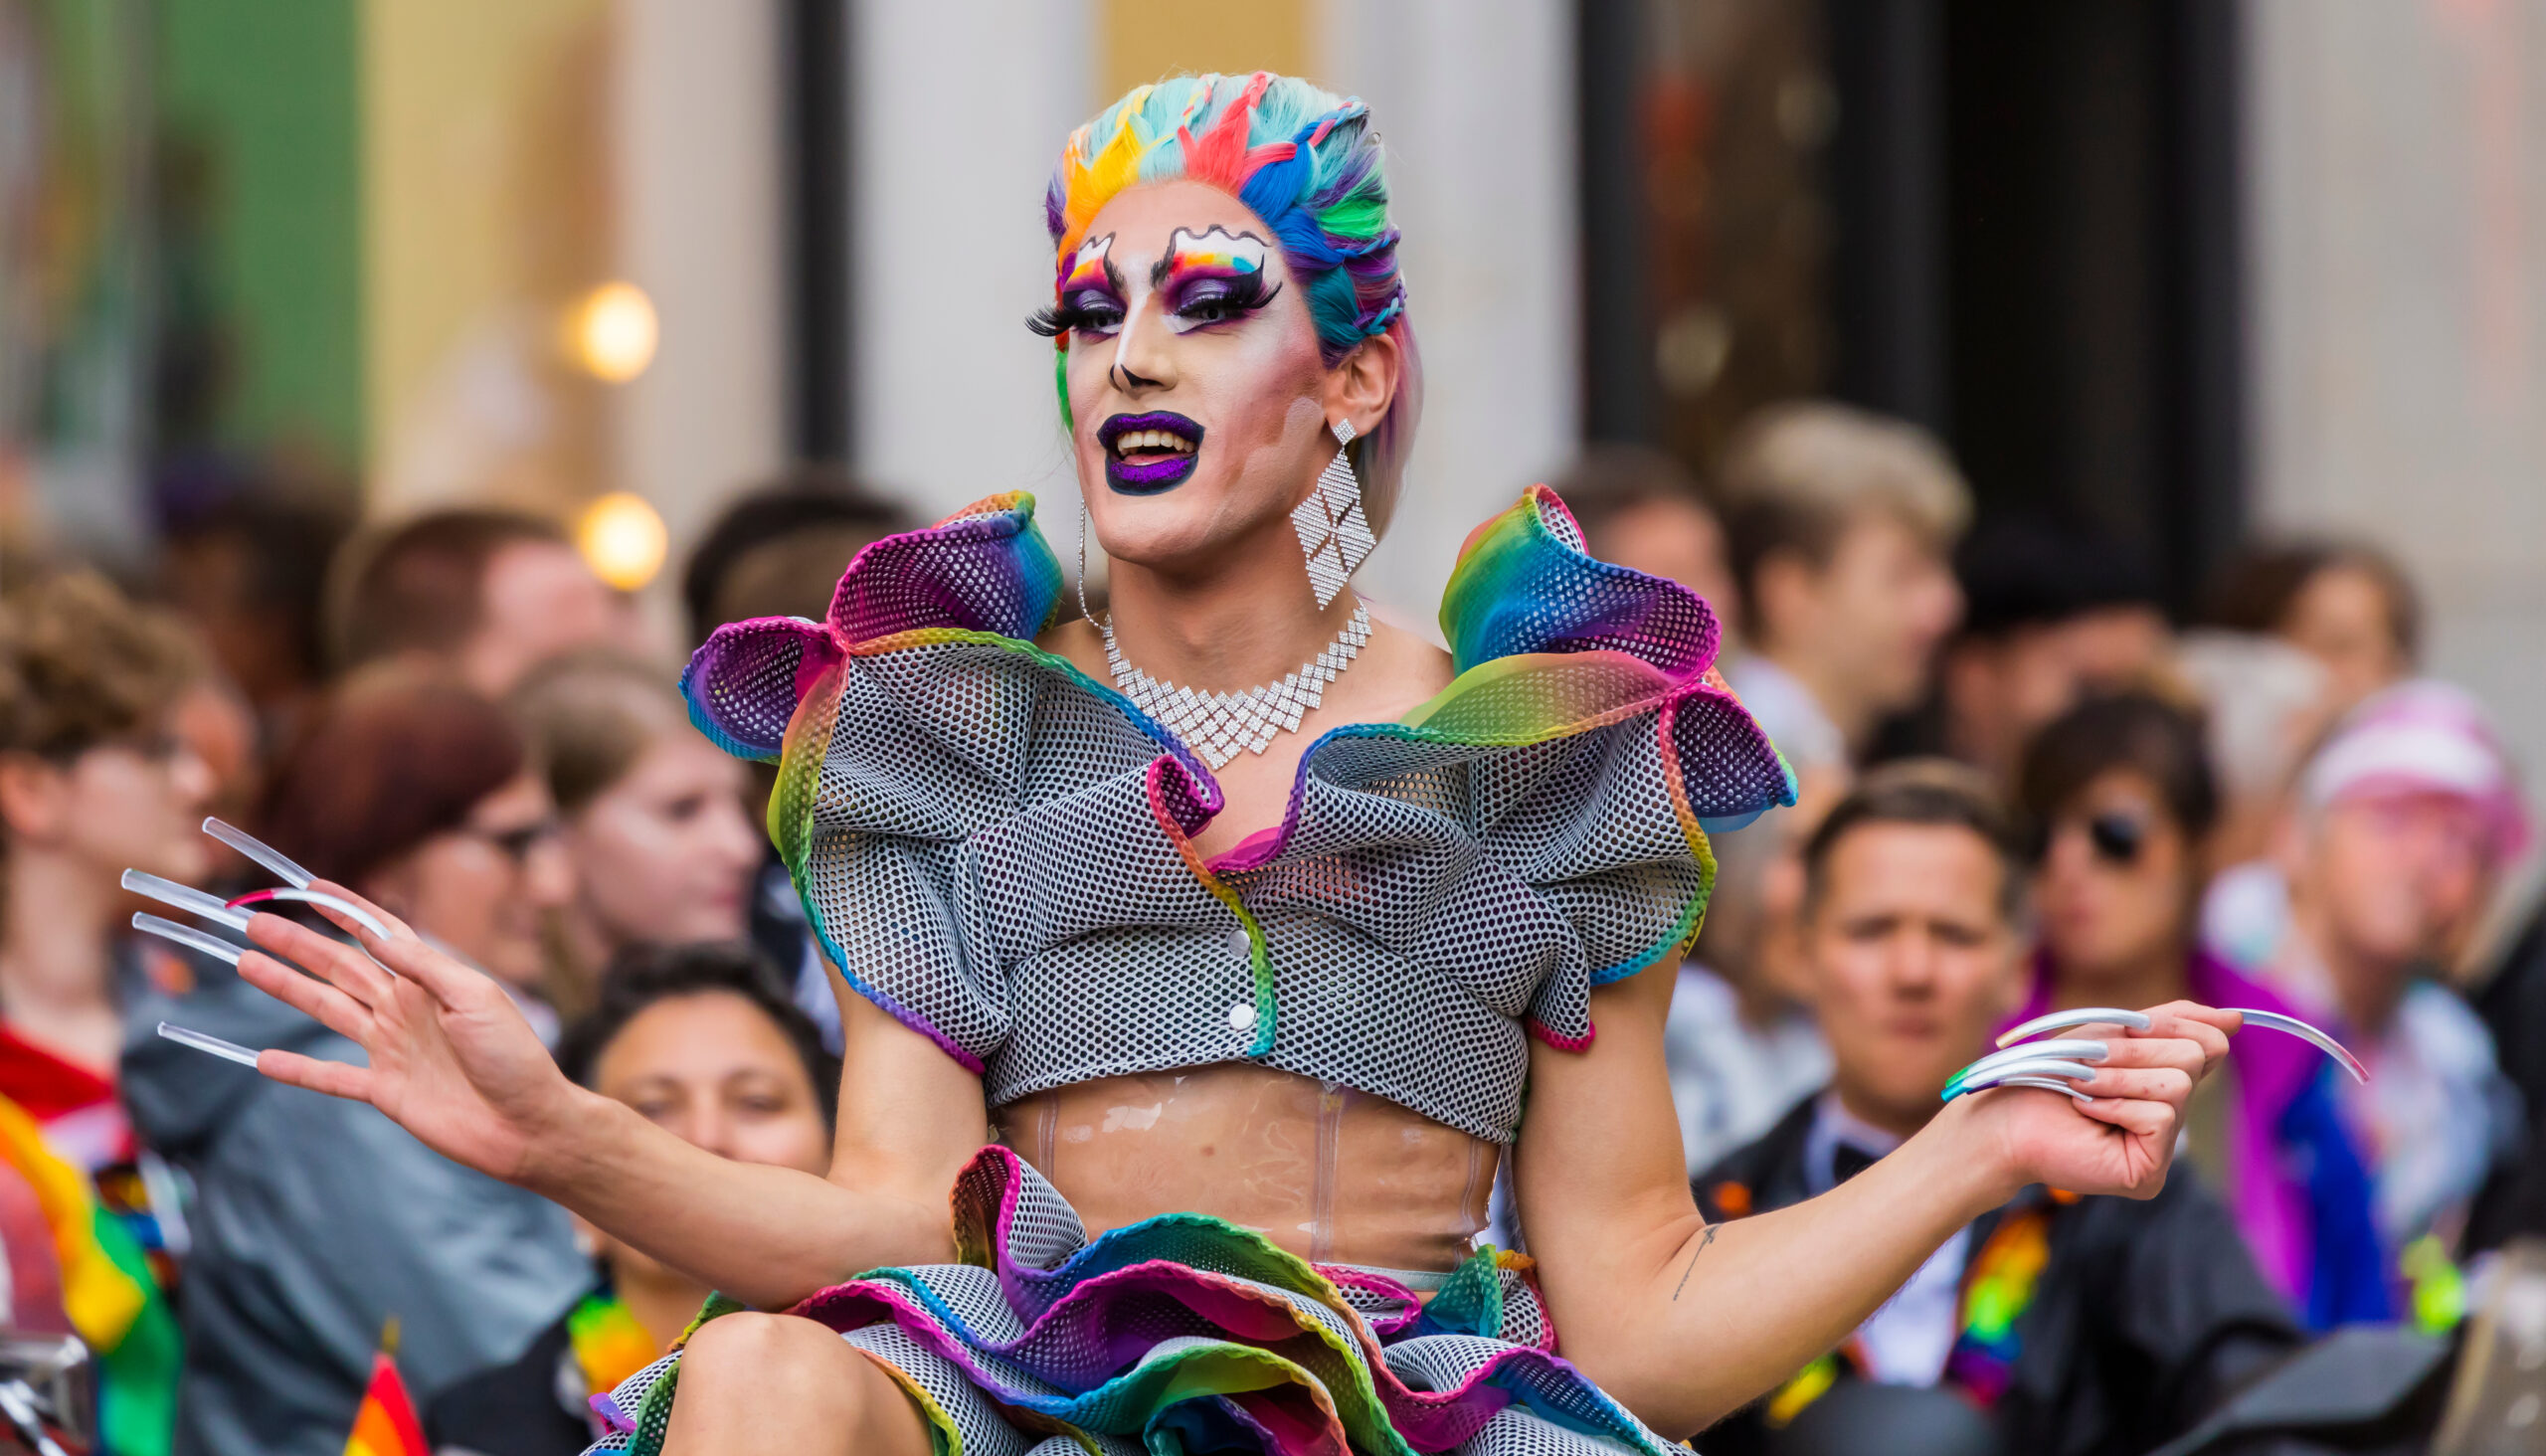 Dragging: Fashion in the fight for LGBTQ+ rights